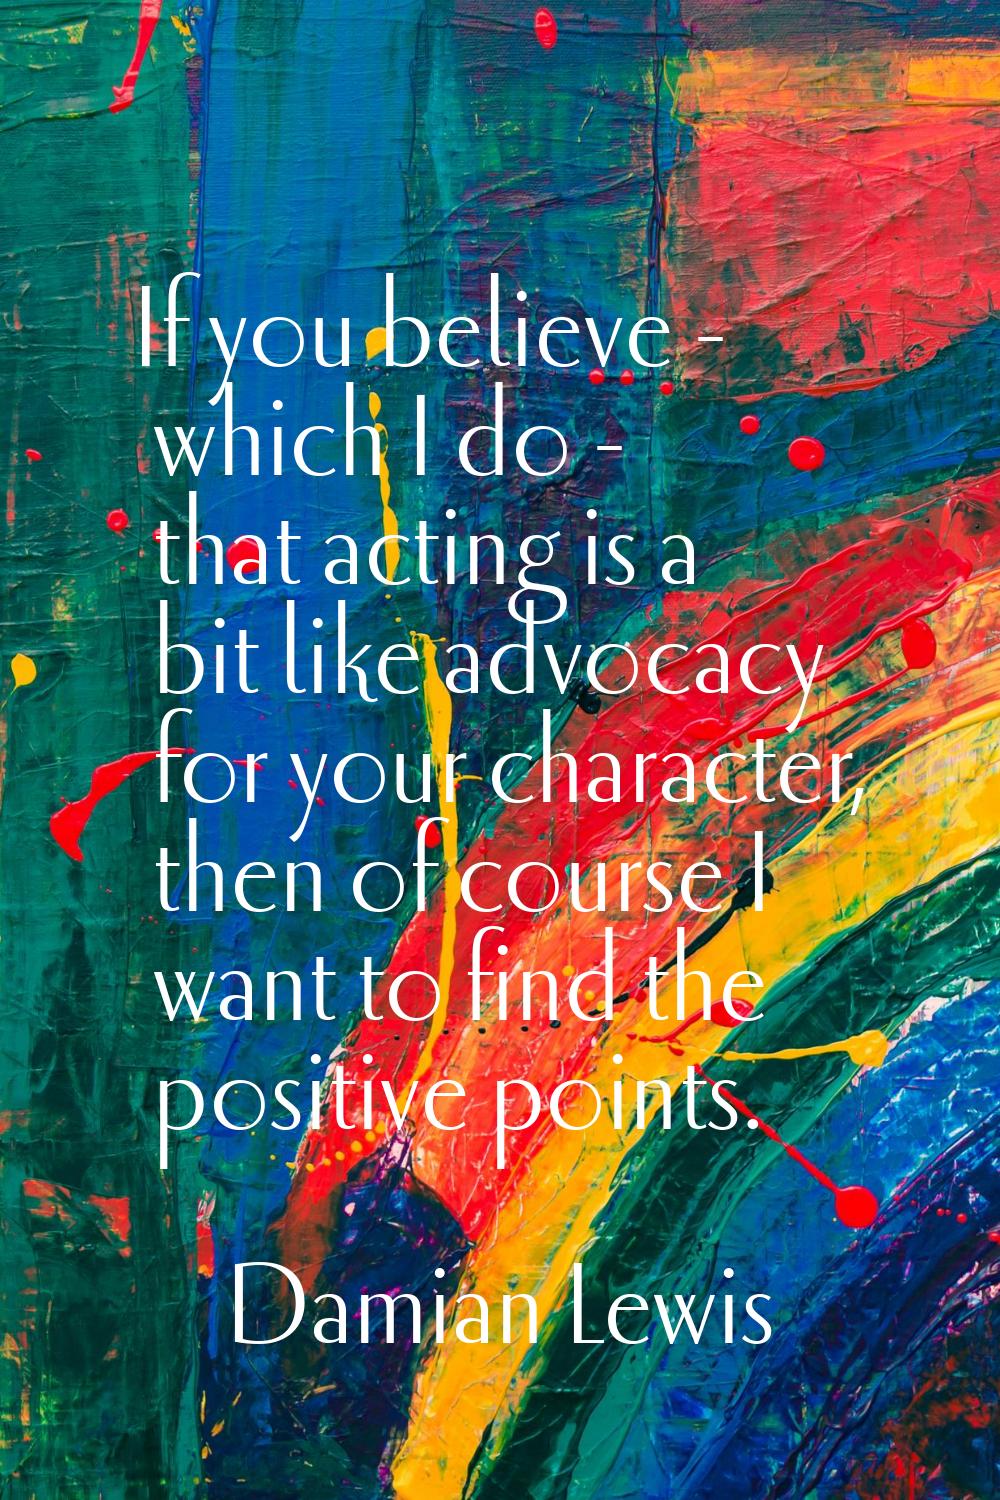 If you believe - which I do - that acting is a bit like advocacy for your character, then of course